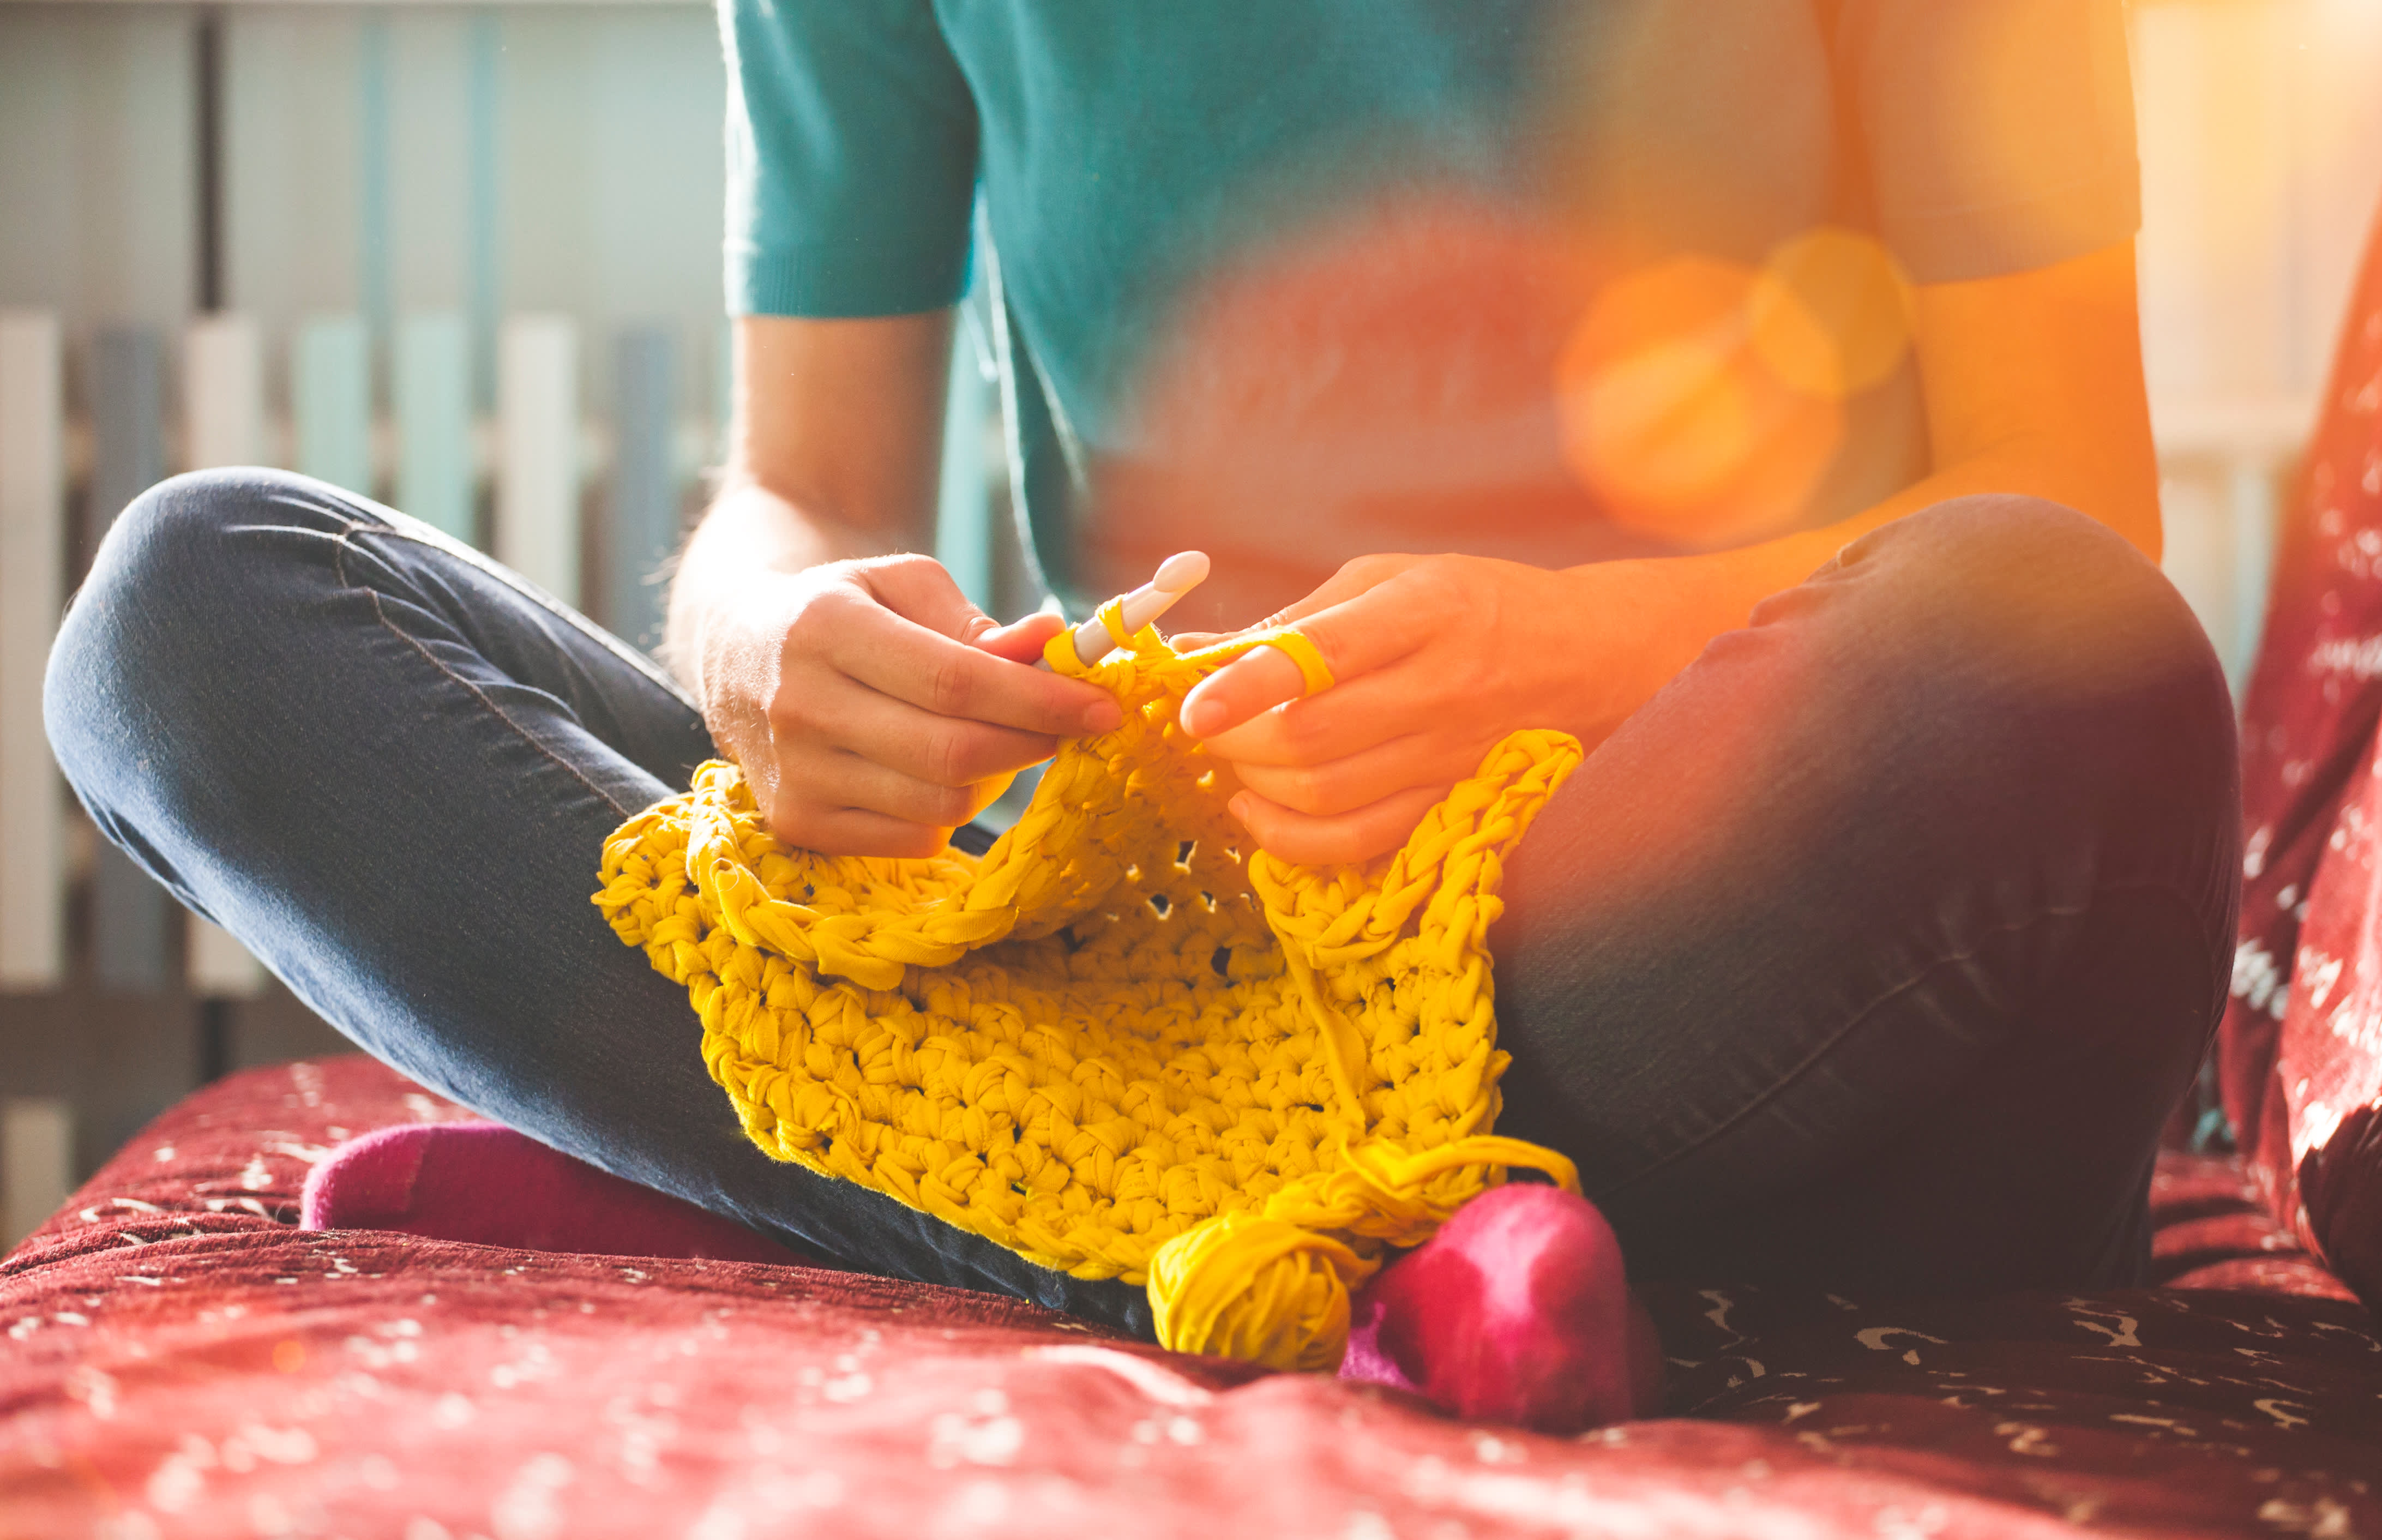 Why Knitting And Crocheting Are Great Activities For Your Mental Health